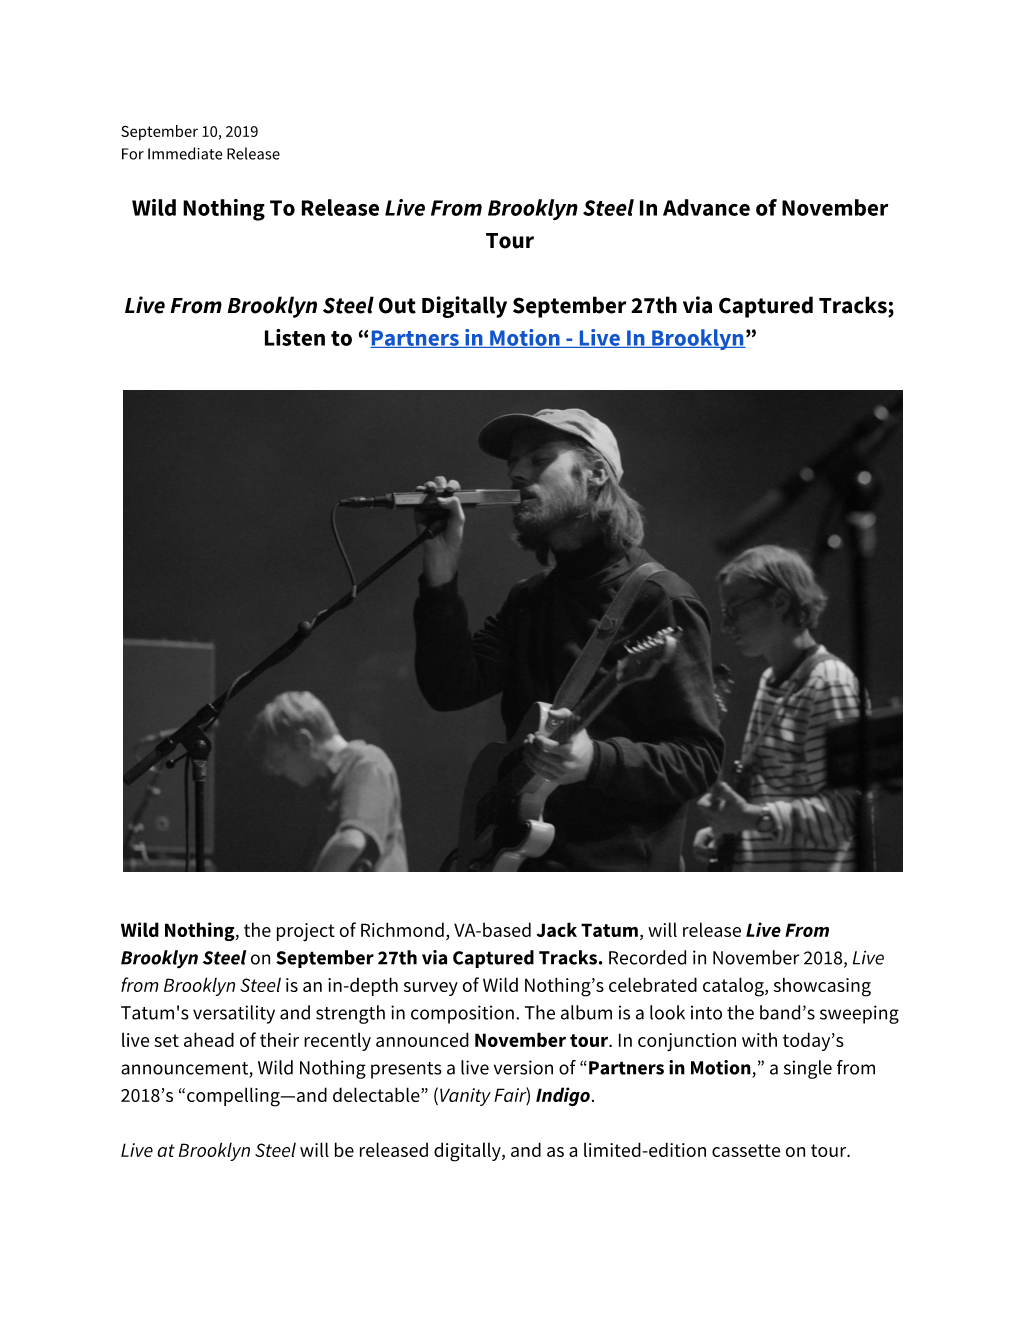 Wild Nothing to Release ​Live from Brooklyn Steel​ in Advance Of